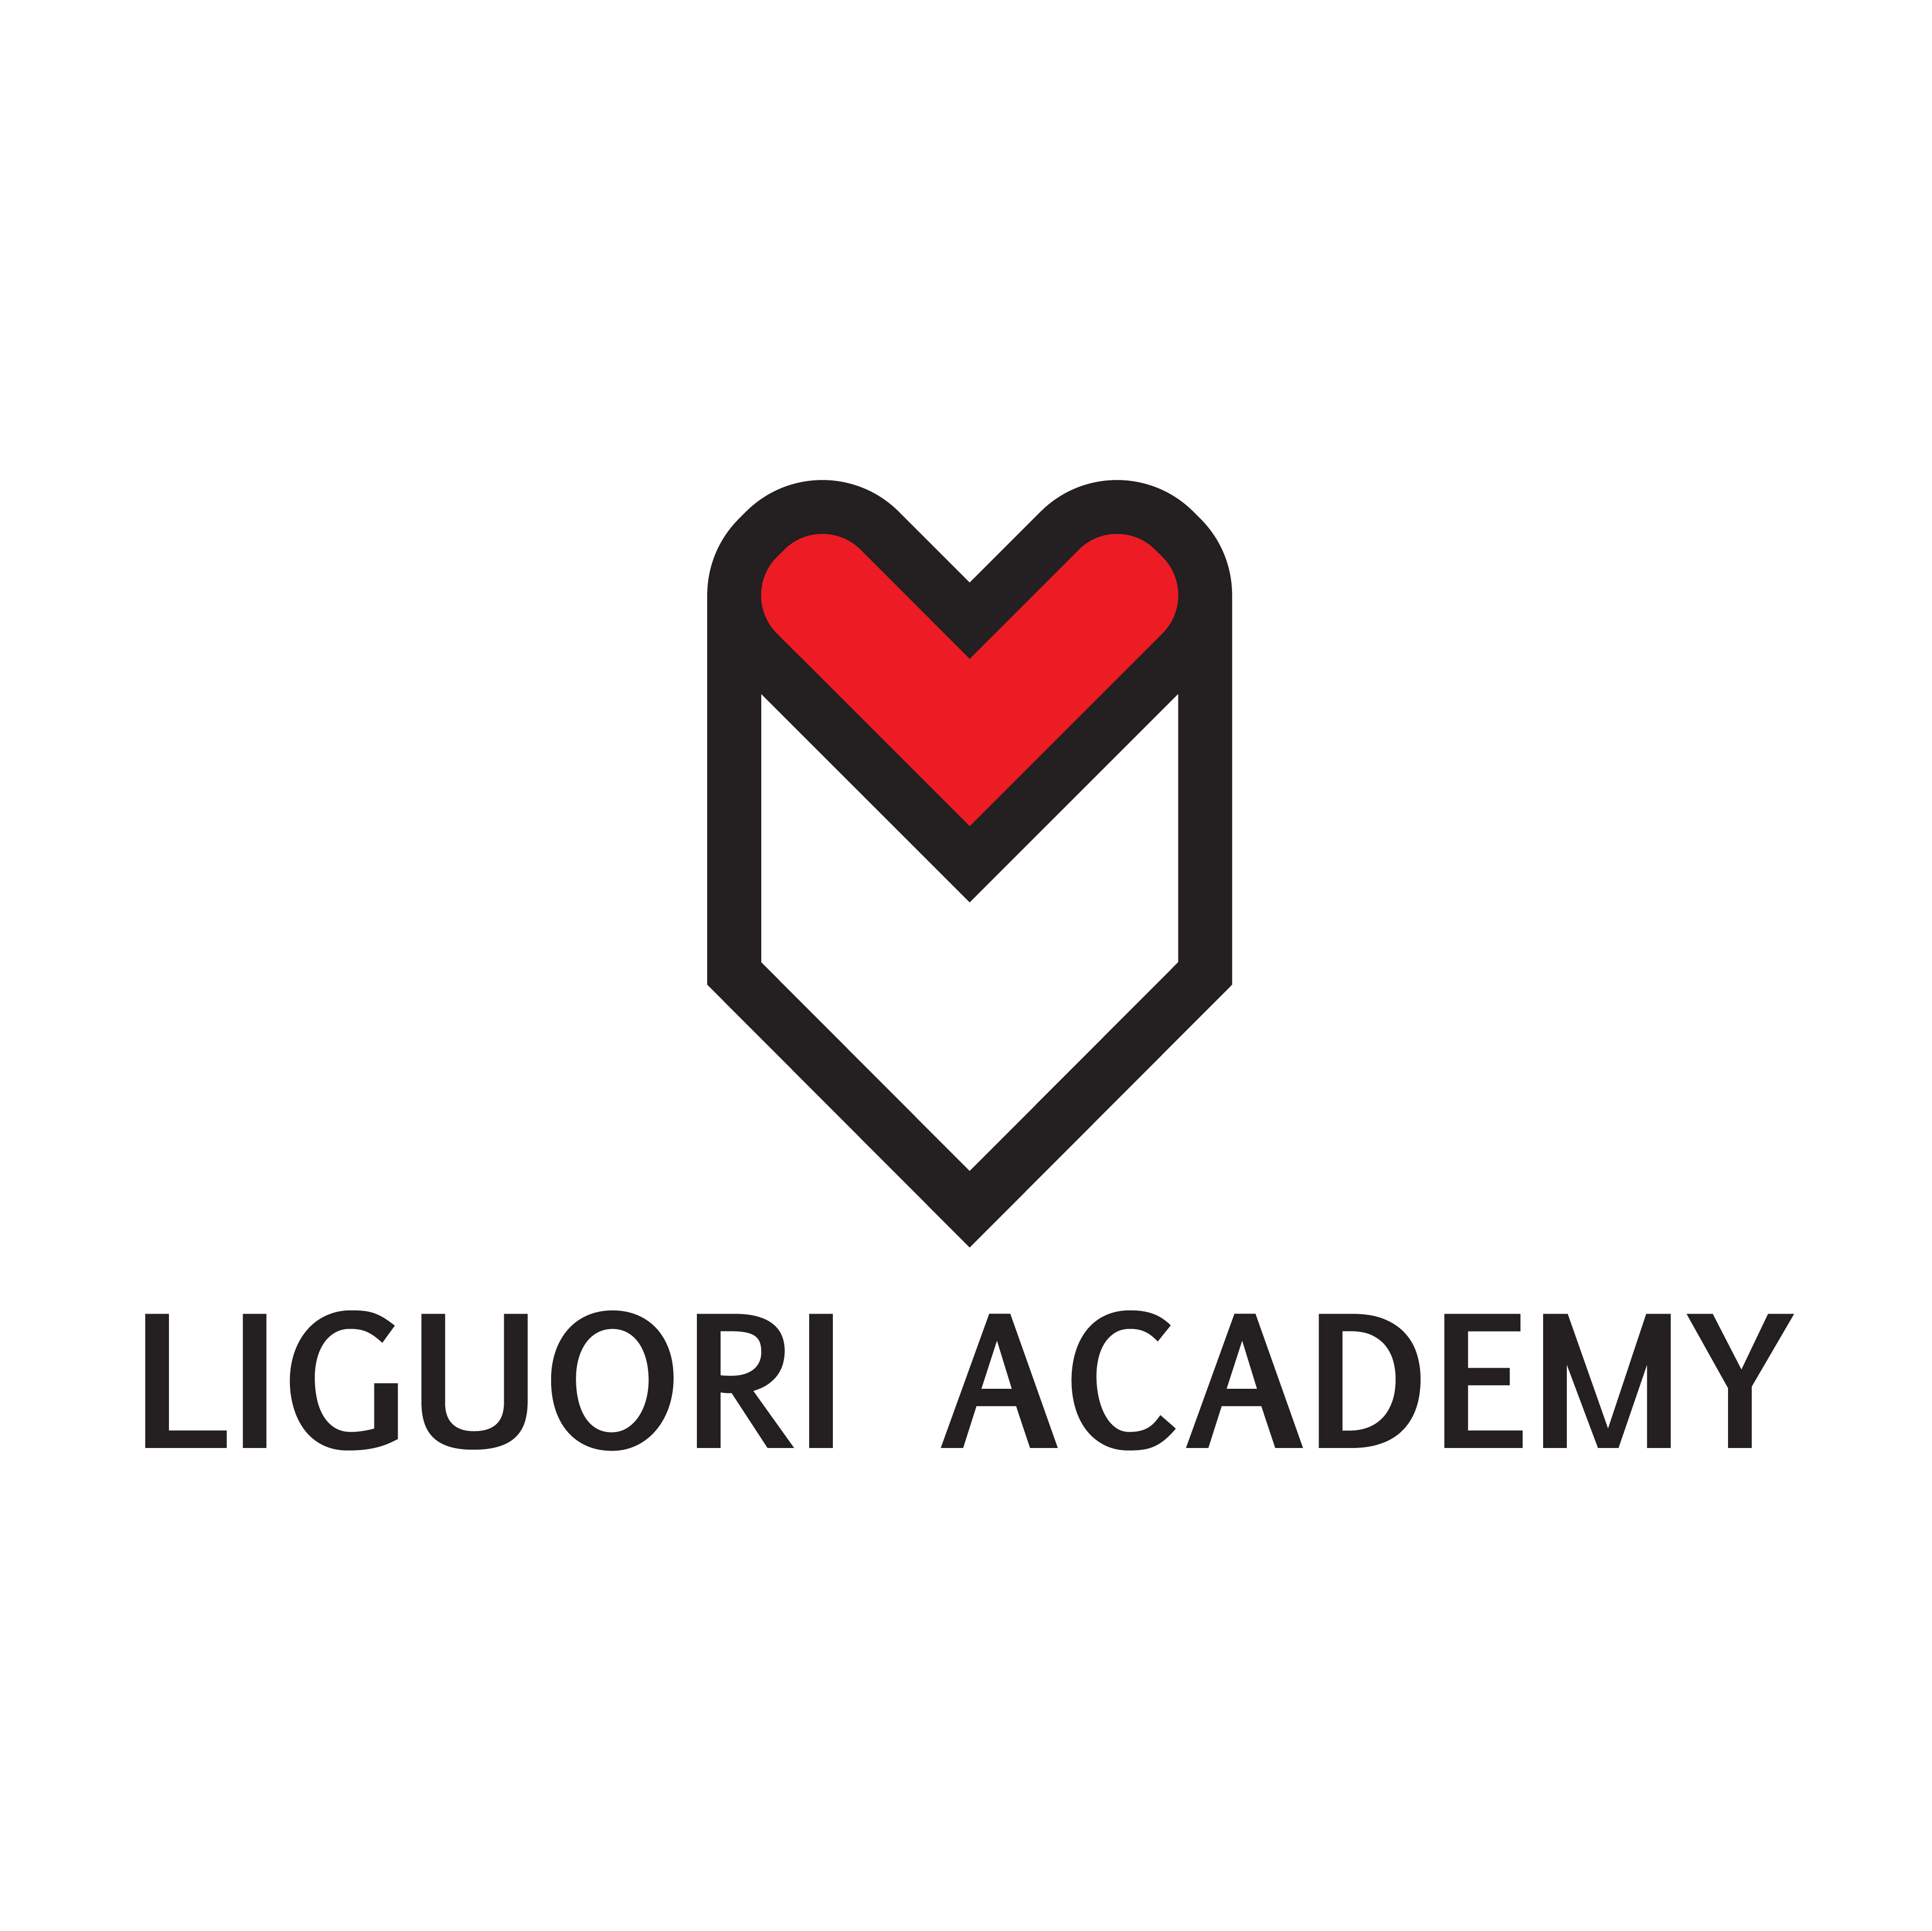 Liguori Academy logo design by logo designer Jason Moss for your inspiration and for the worlds largest logo competition